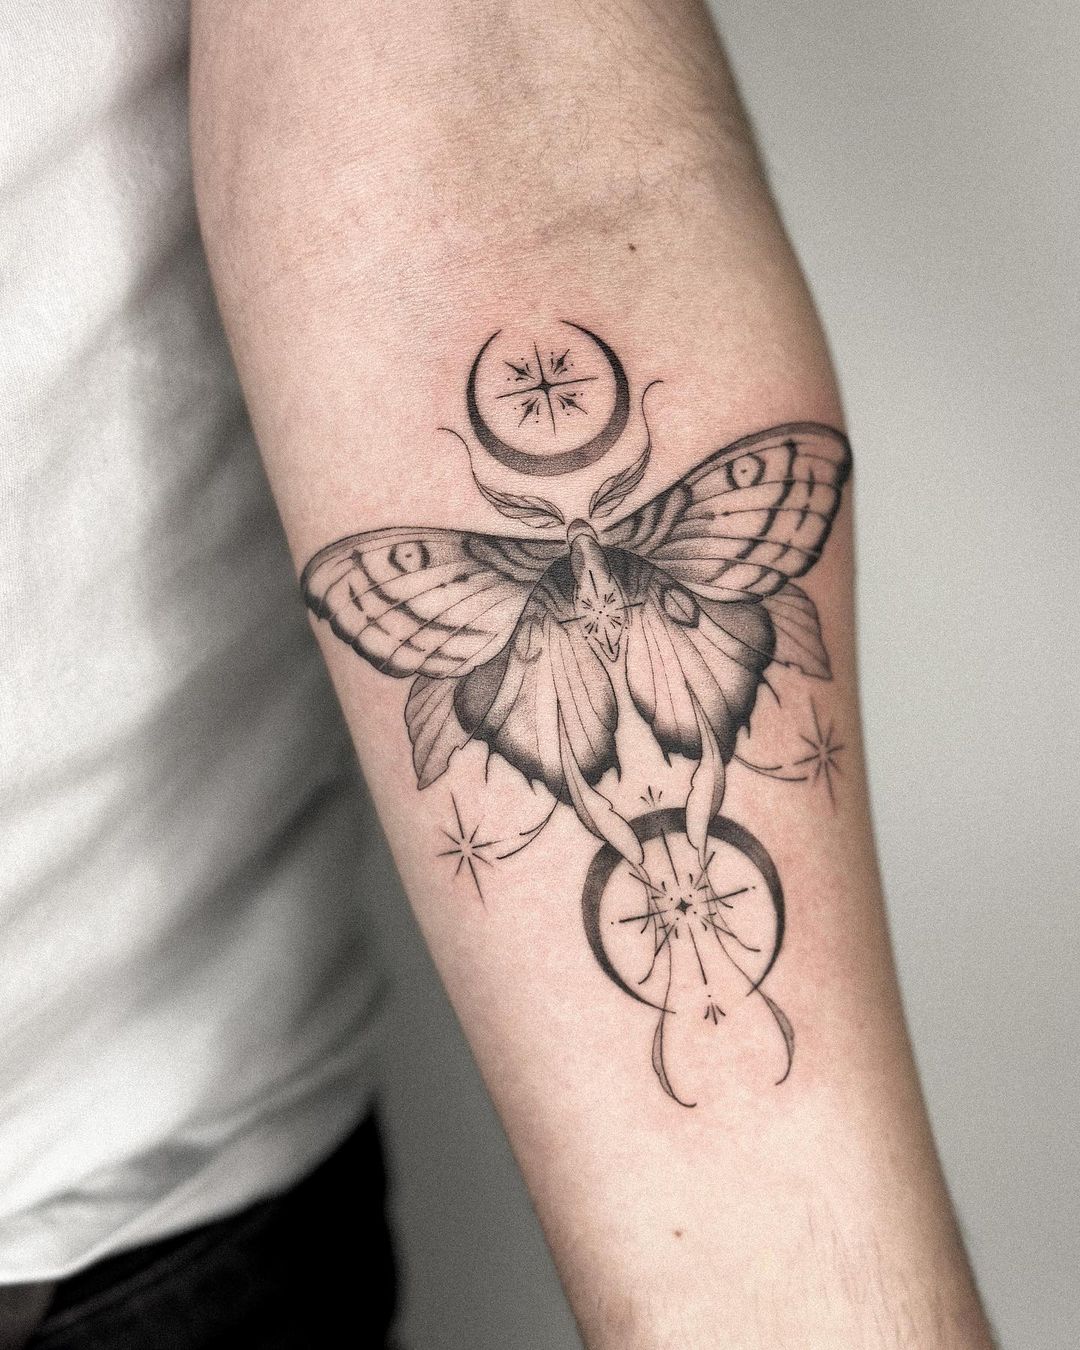 Moth tattoo design by doy.ink